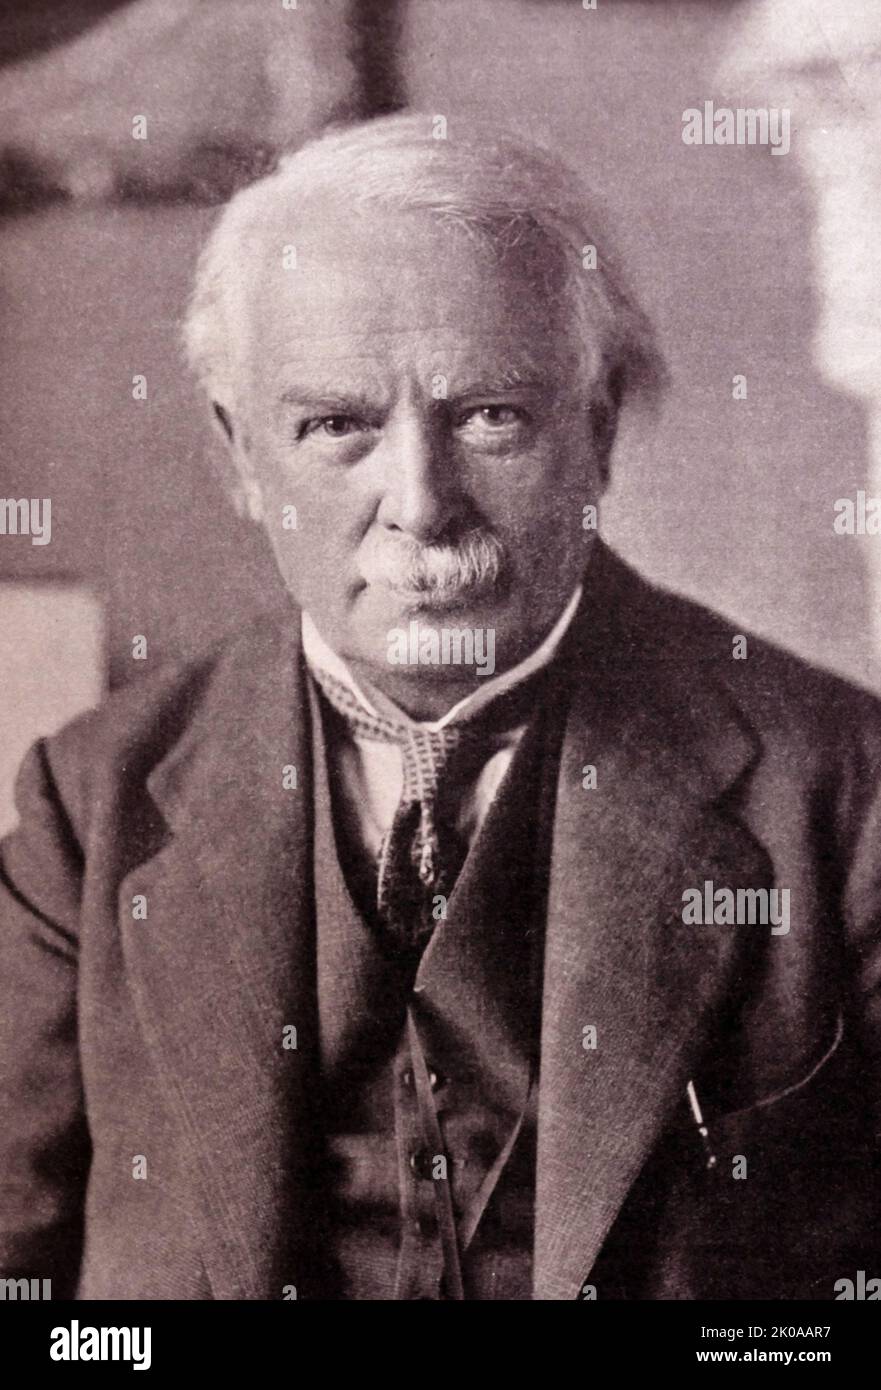 David Lloyd George, 1st Earl Lloyd-George of Dwyfor, OM PC (17 January 1863 - 26 March 1945) was a British statesman and Liberal Party politician who served as Prime Minister of the United Kingdom from 1916 to 1922. The last Liberal to serve as prime minister, he held the office during the final two years of the First World War and led the British delegation at the 1919 Paris Peace Conference Stock Photo